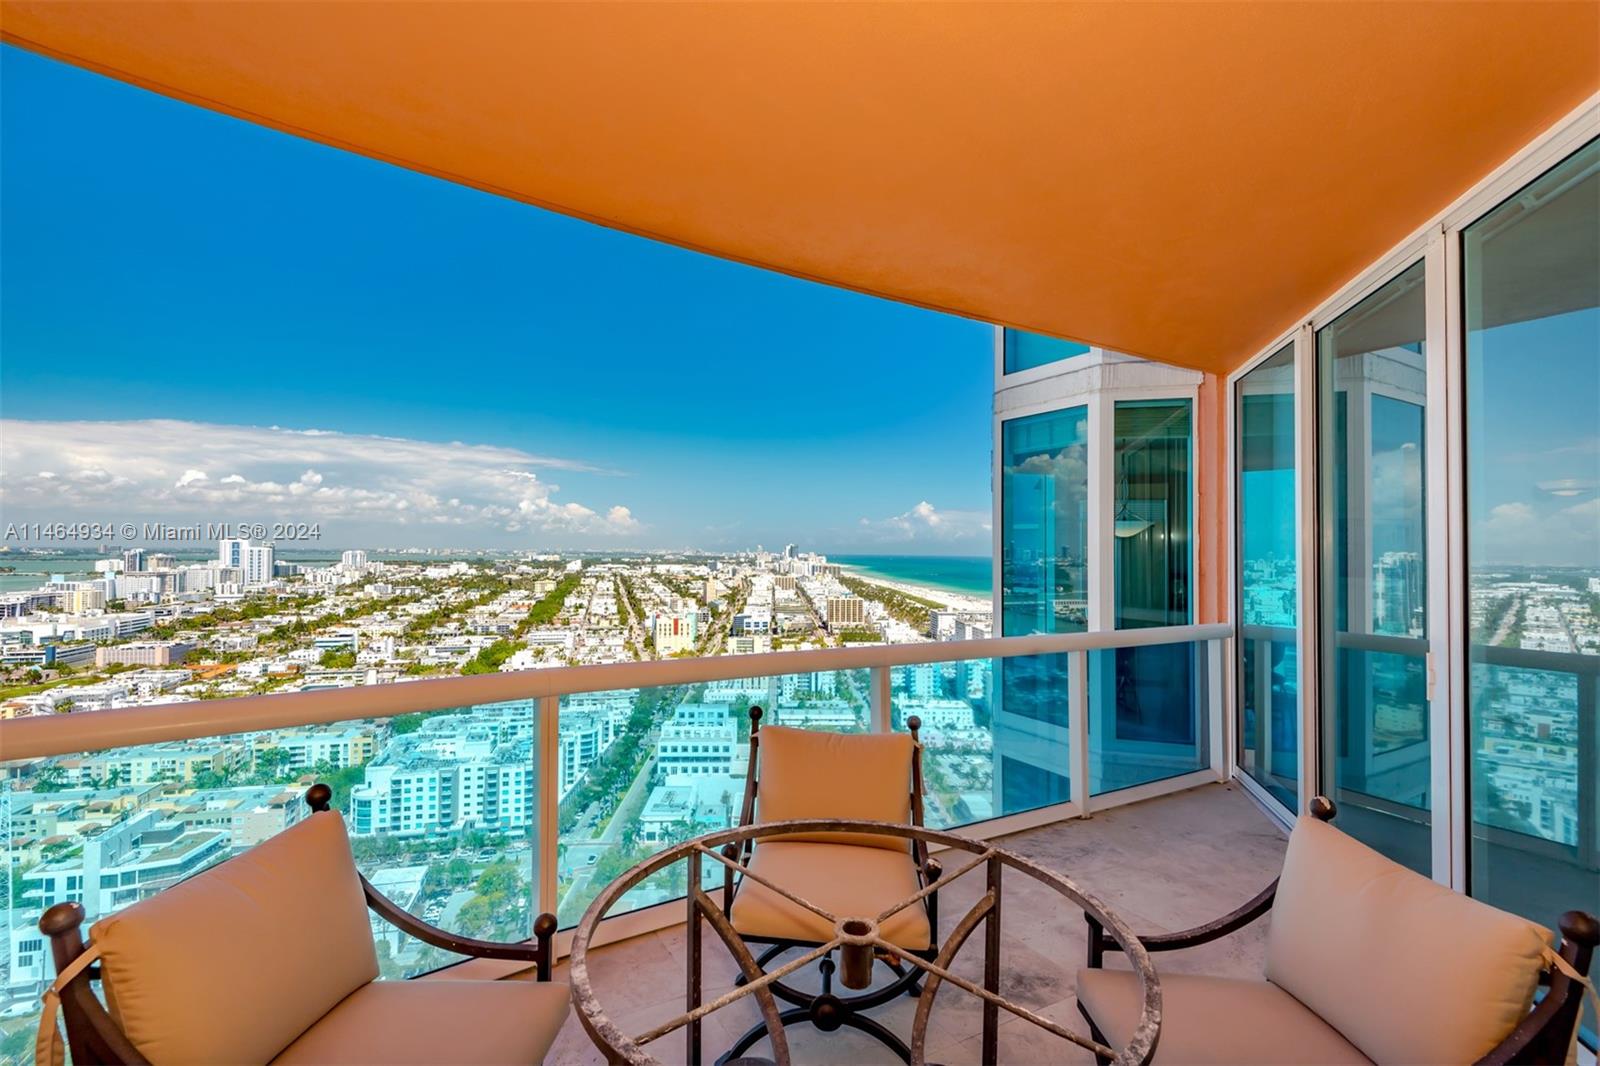 300 S Pointe Dr 3306, Miami Beach, Florida 33139, 2 Bedrooms Bedrooms, ,2 BathroomsBathrooms,Residential,For Sale,300 S Pointe Dr 3306,A11464934